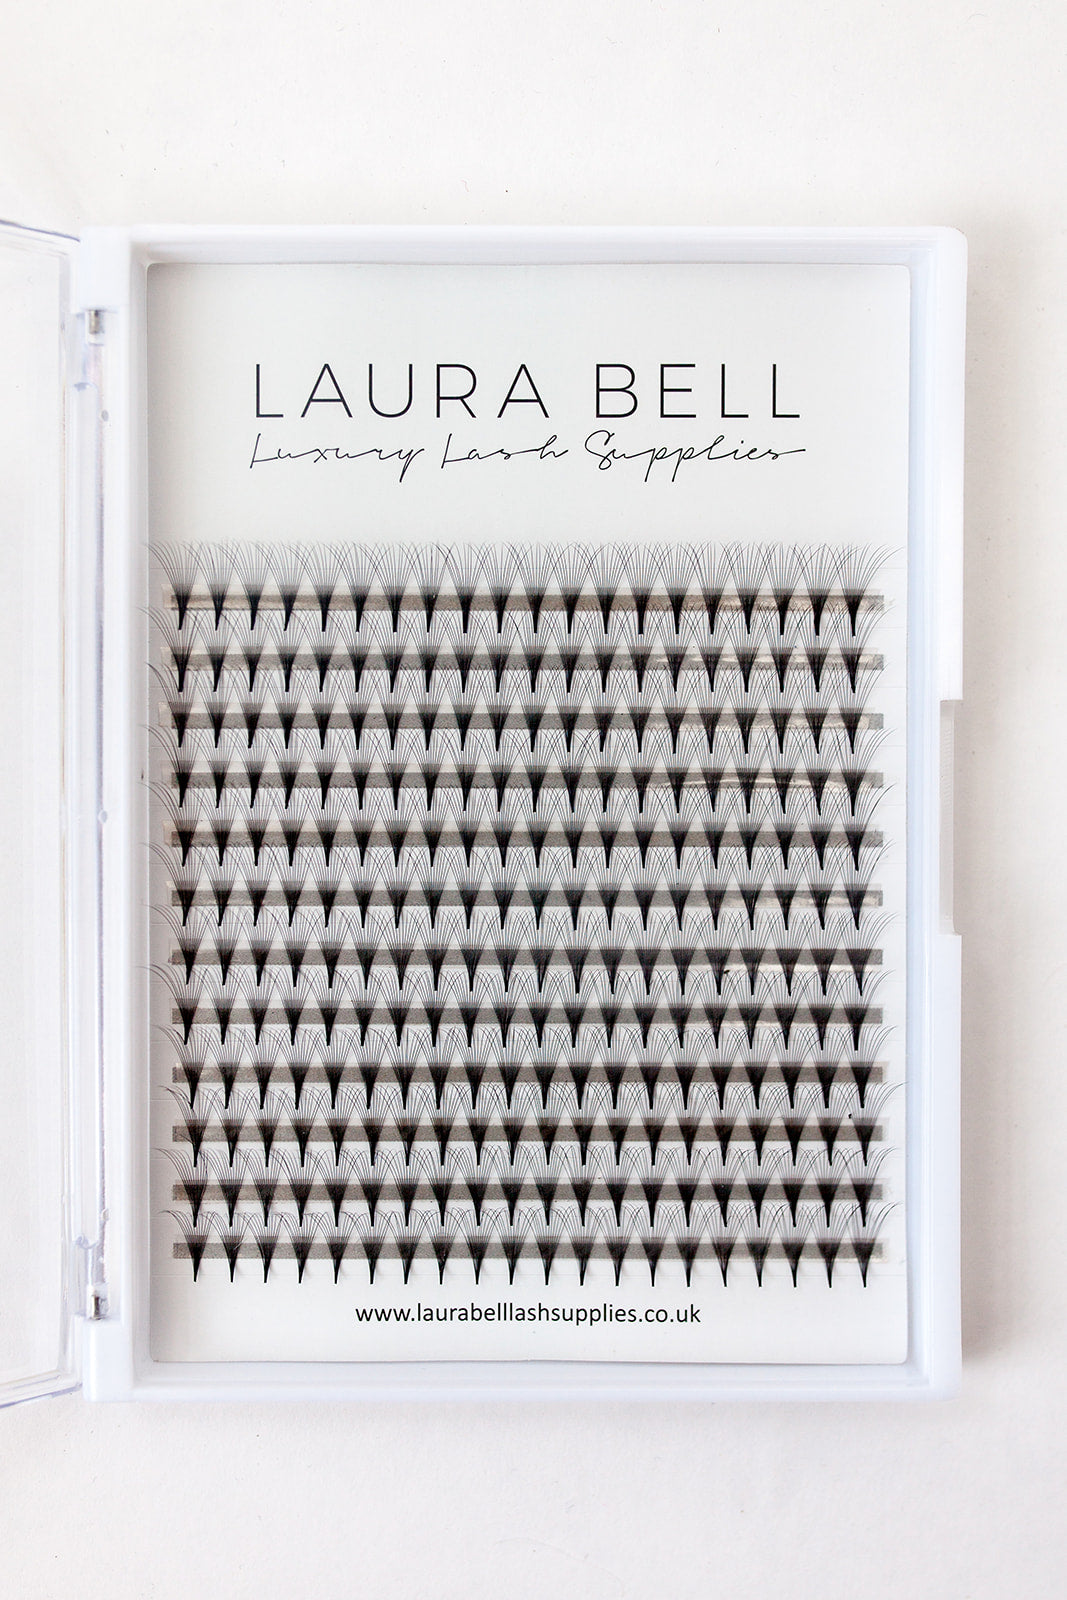 12D Pre Made Volume Large Tray - Laura Bell Luxury Lash Supplies